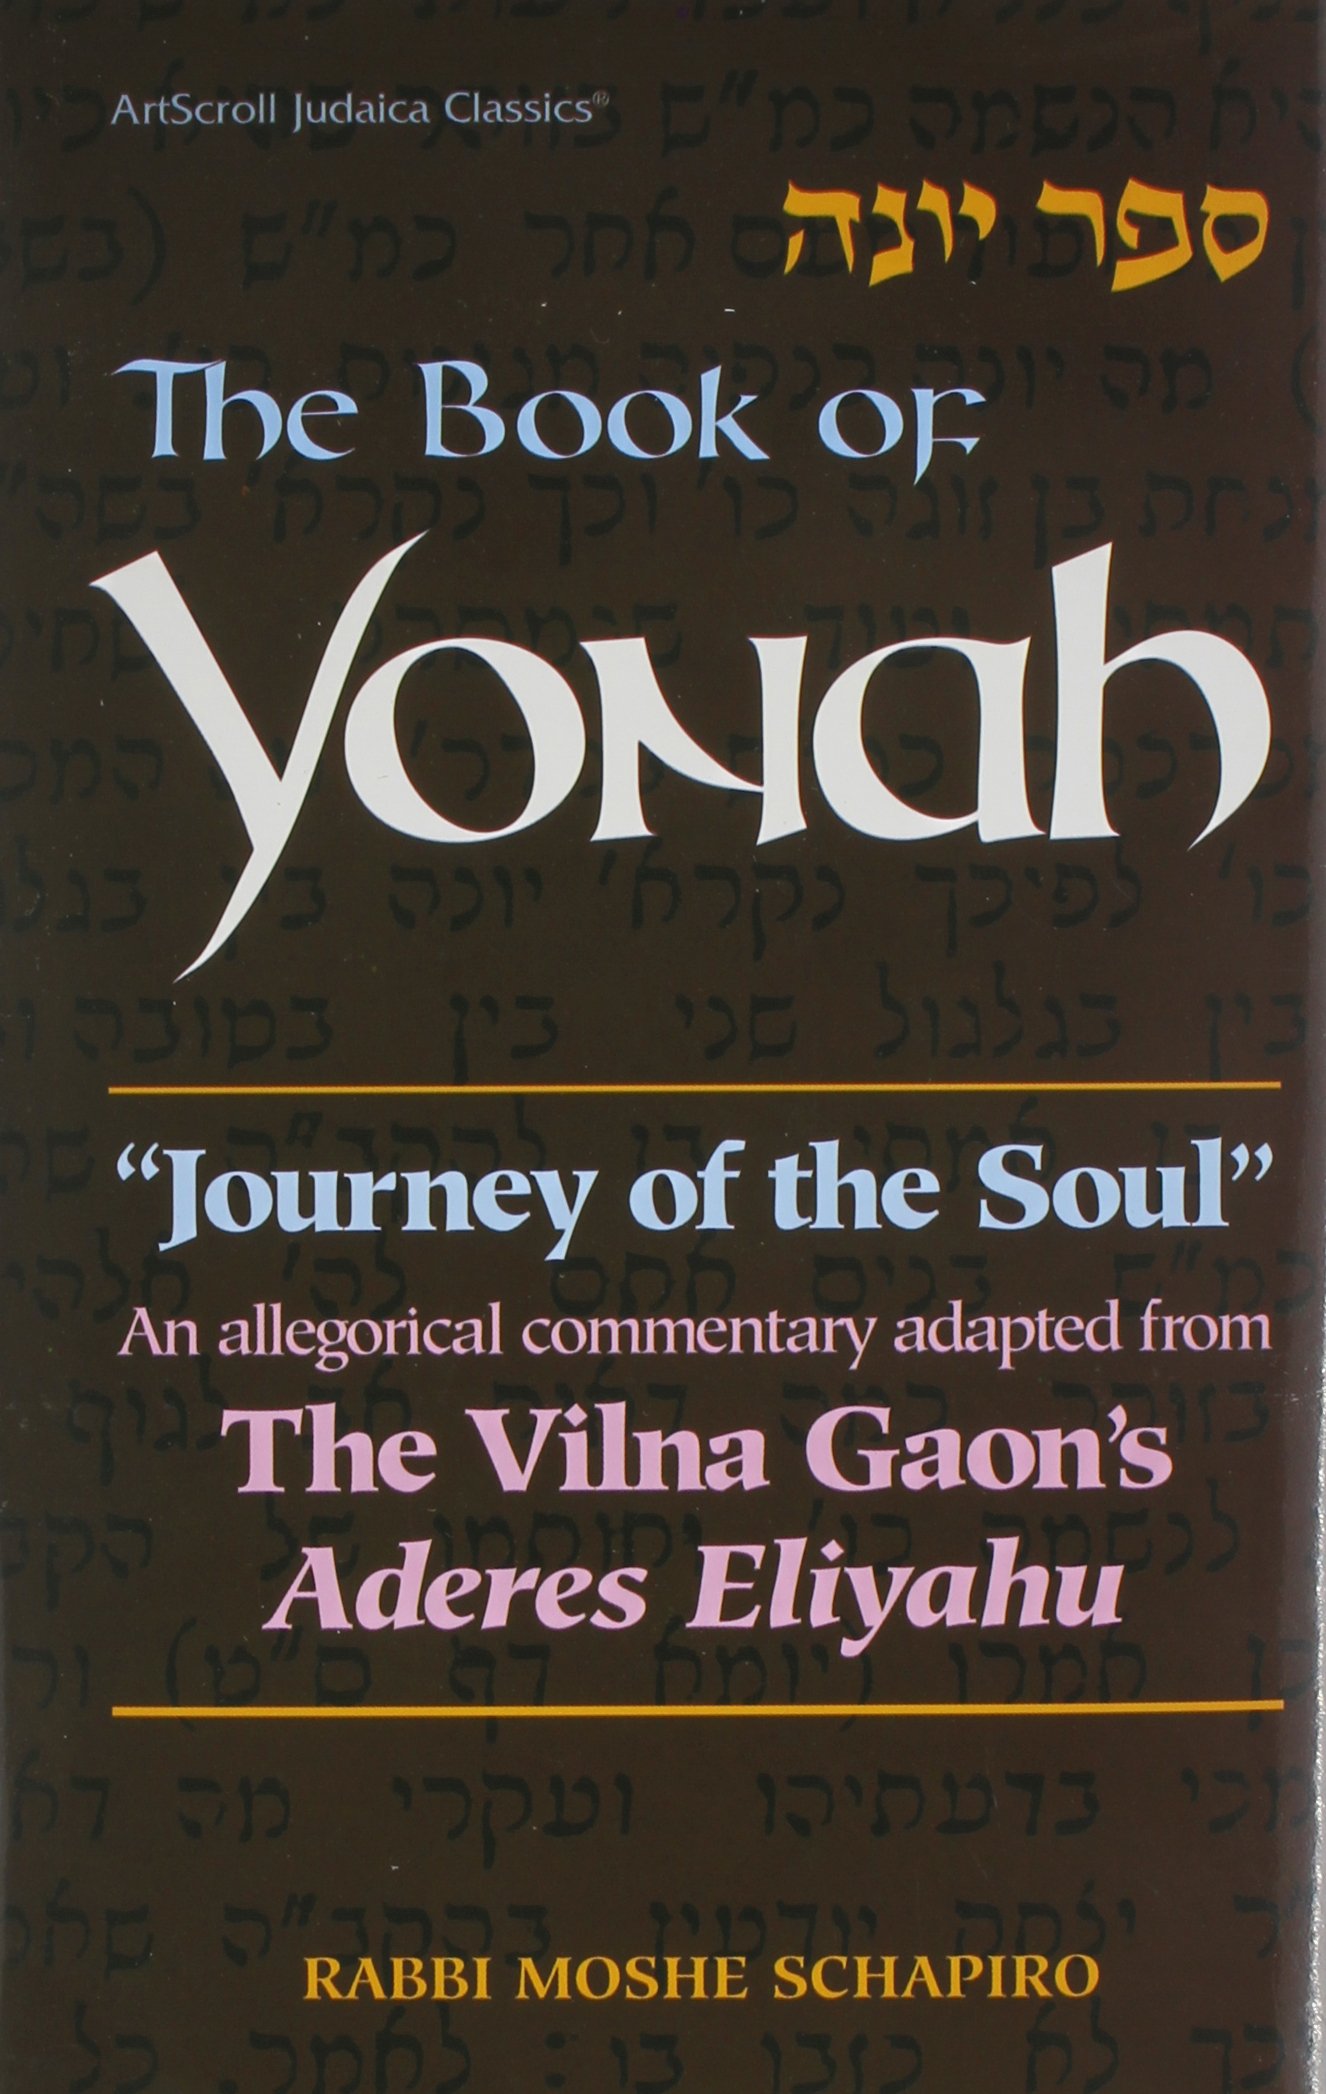 The book of Yonah:journey of the soul, an allegorical commentary adapted from the Vilná Gaon´s Aderes Eliyahu